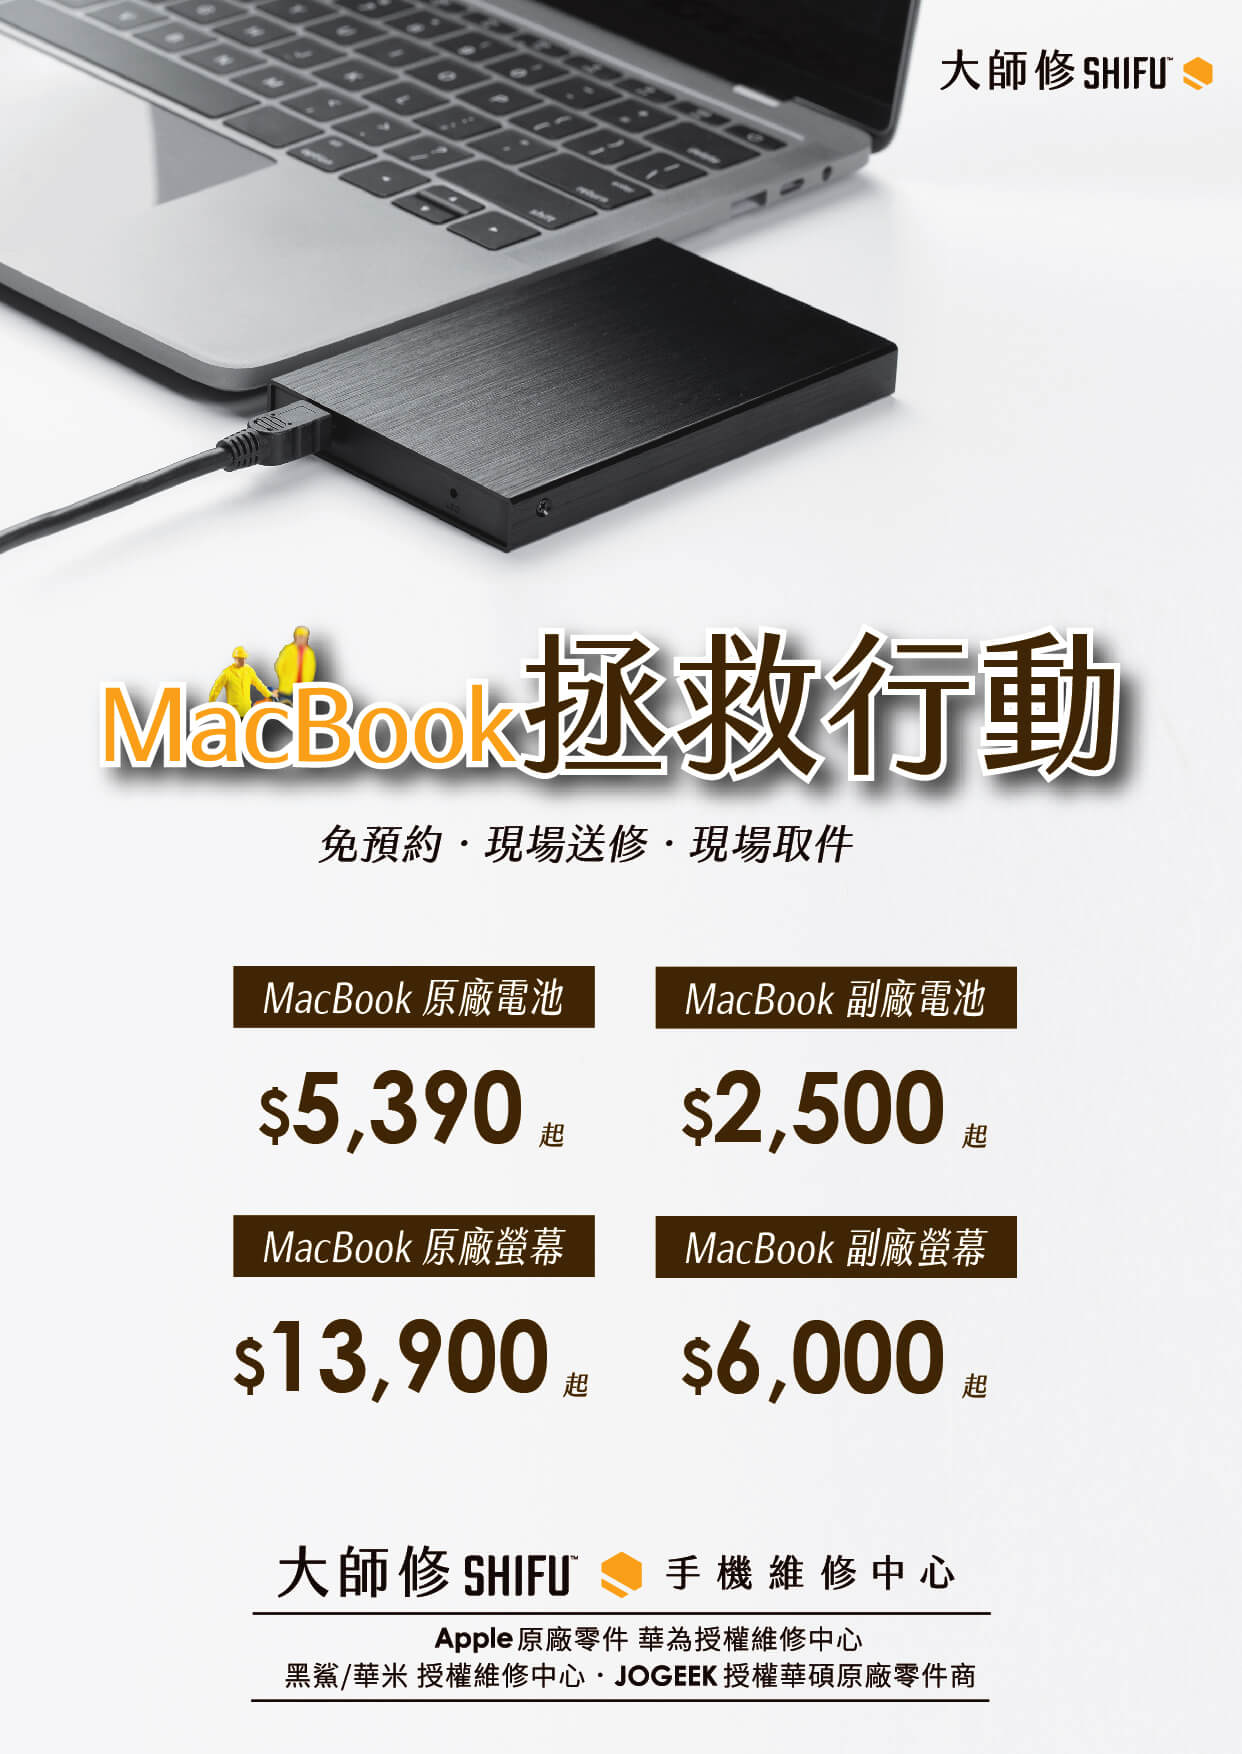 You are currently viewing MadBook拯救行動，筆電出狀況，工作超煩惱